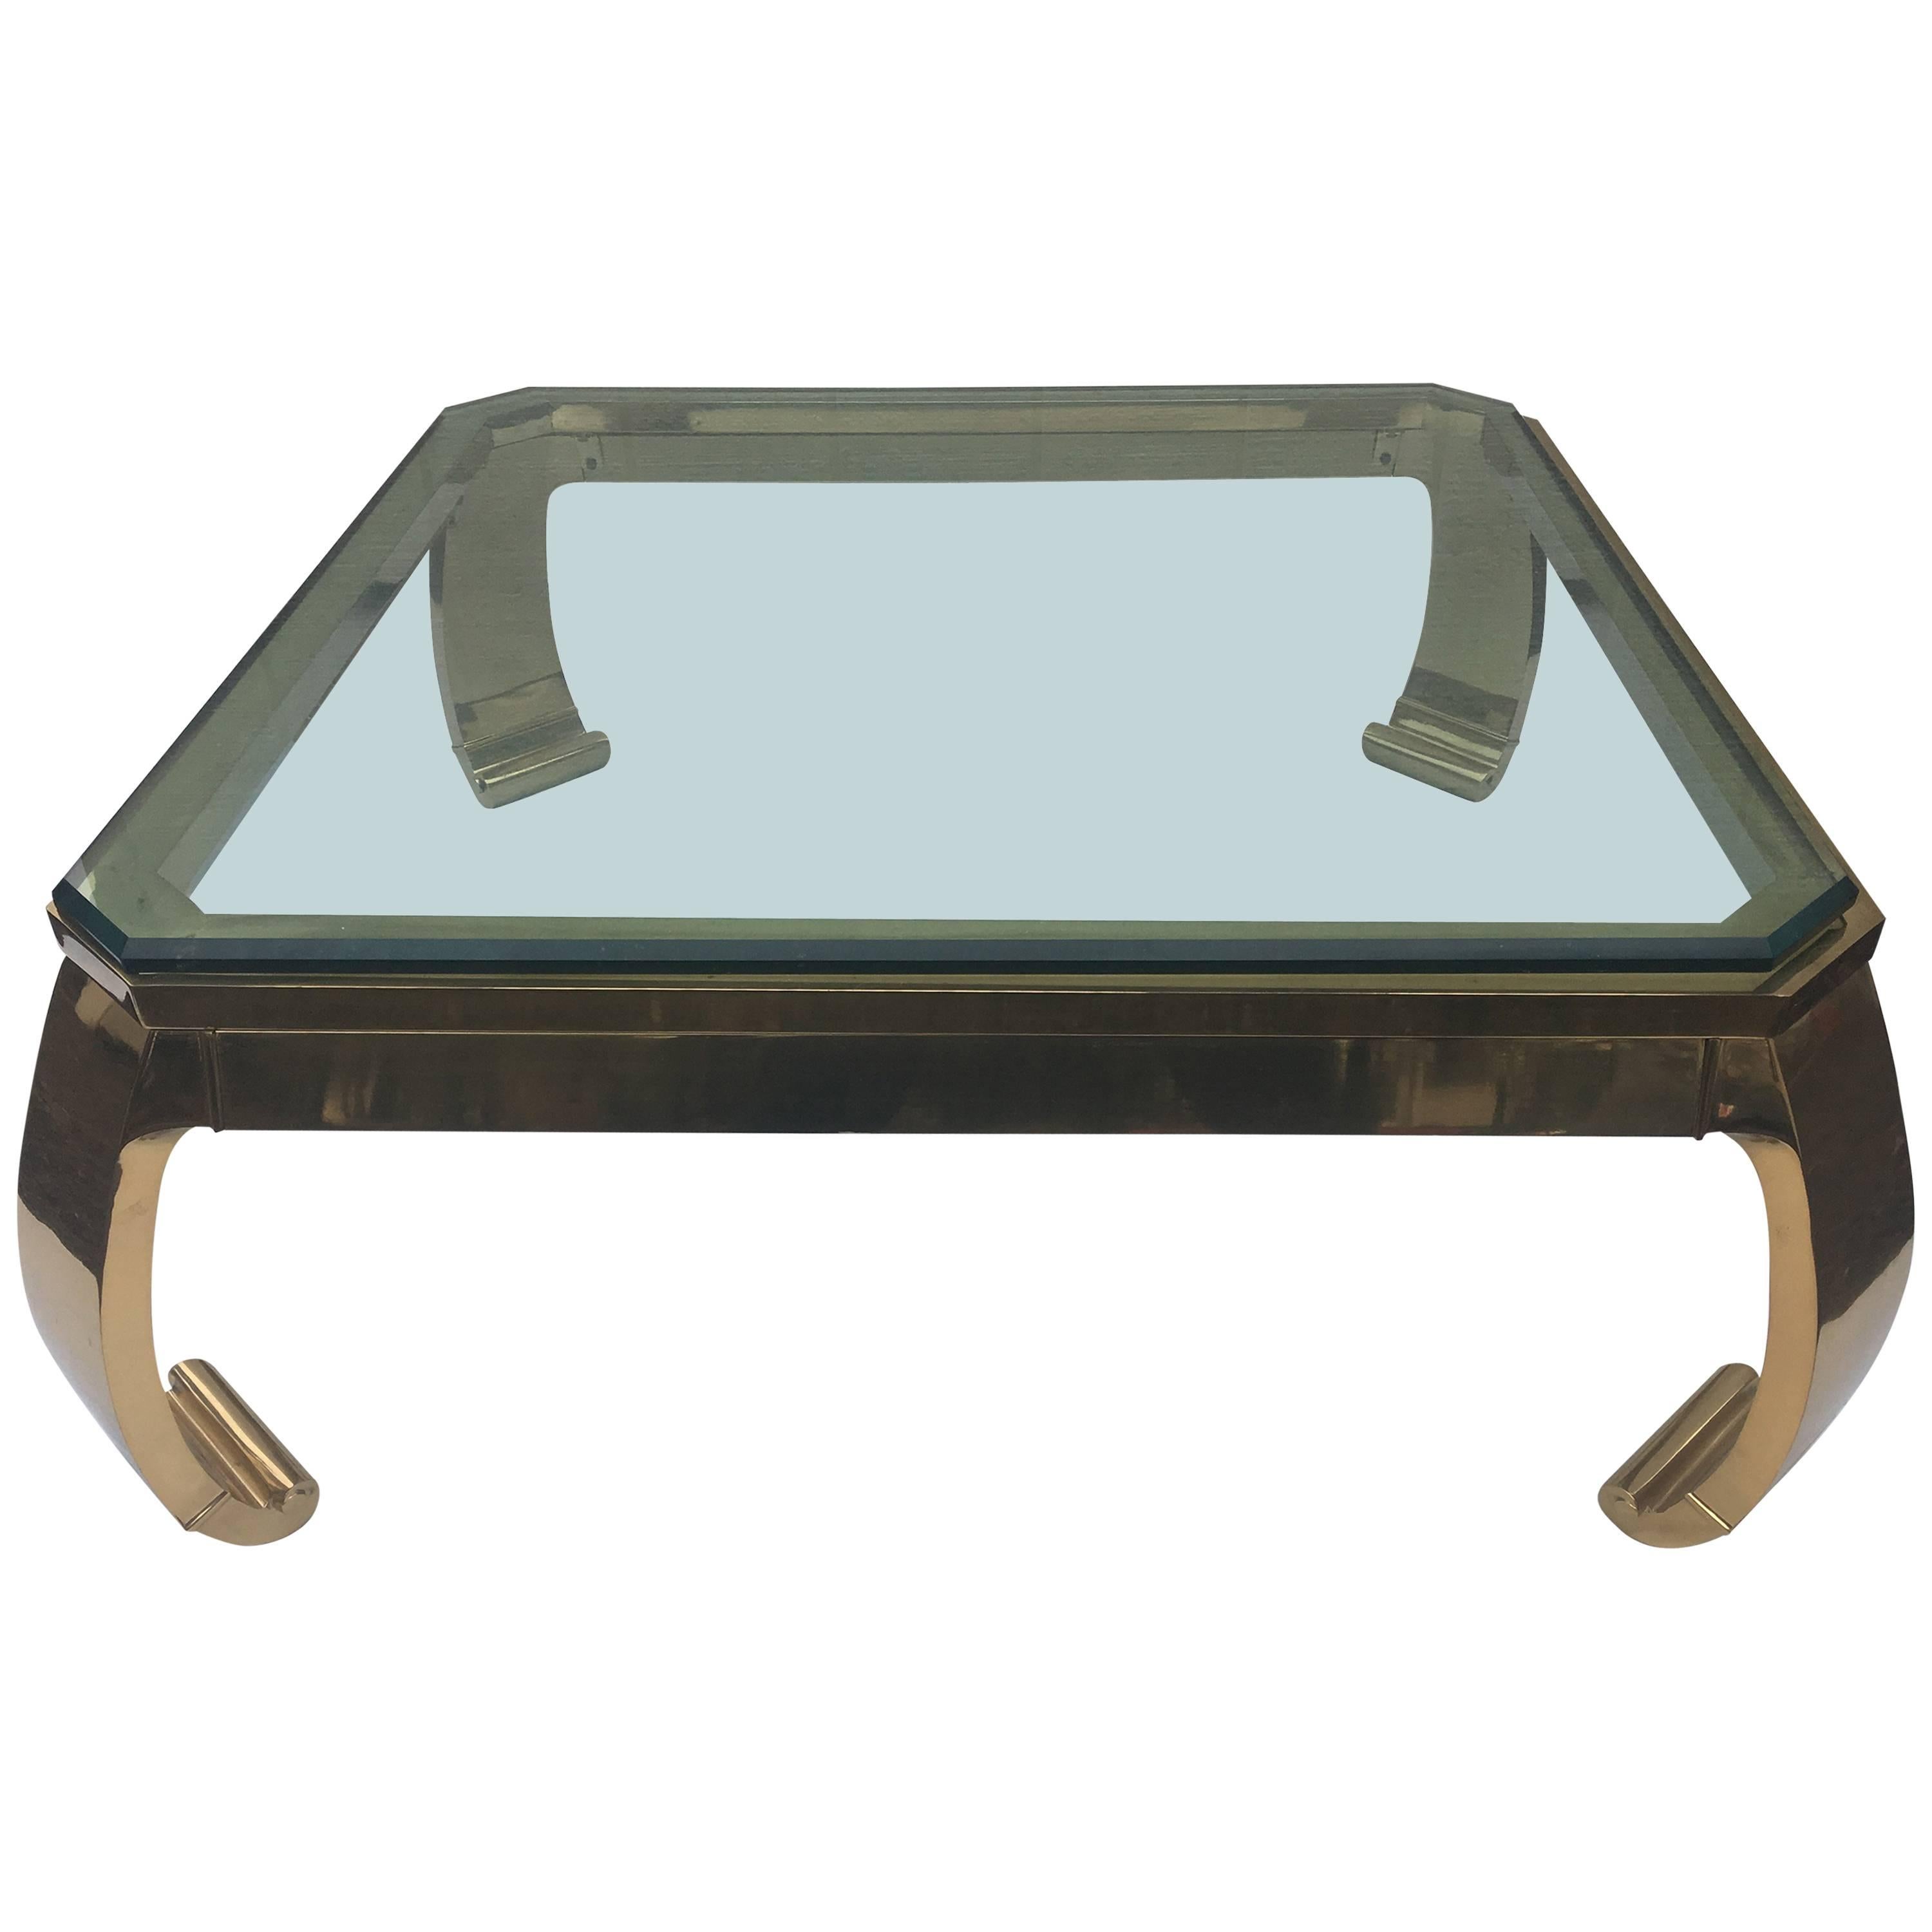  Asian Inspired Brass and Glass Coffee Table attributed to Mastercraft